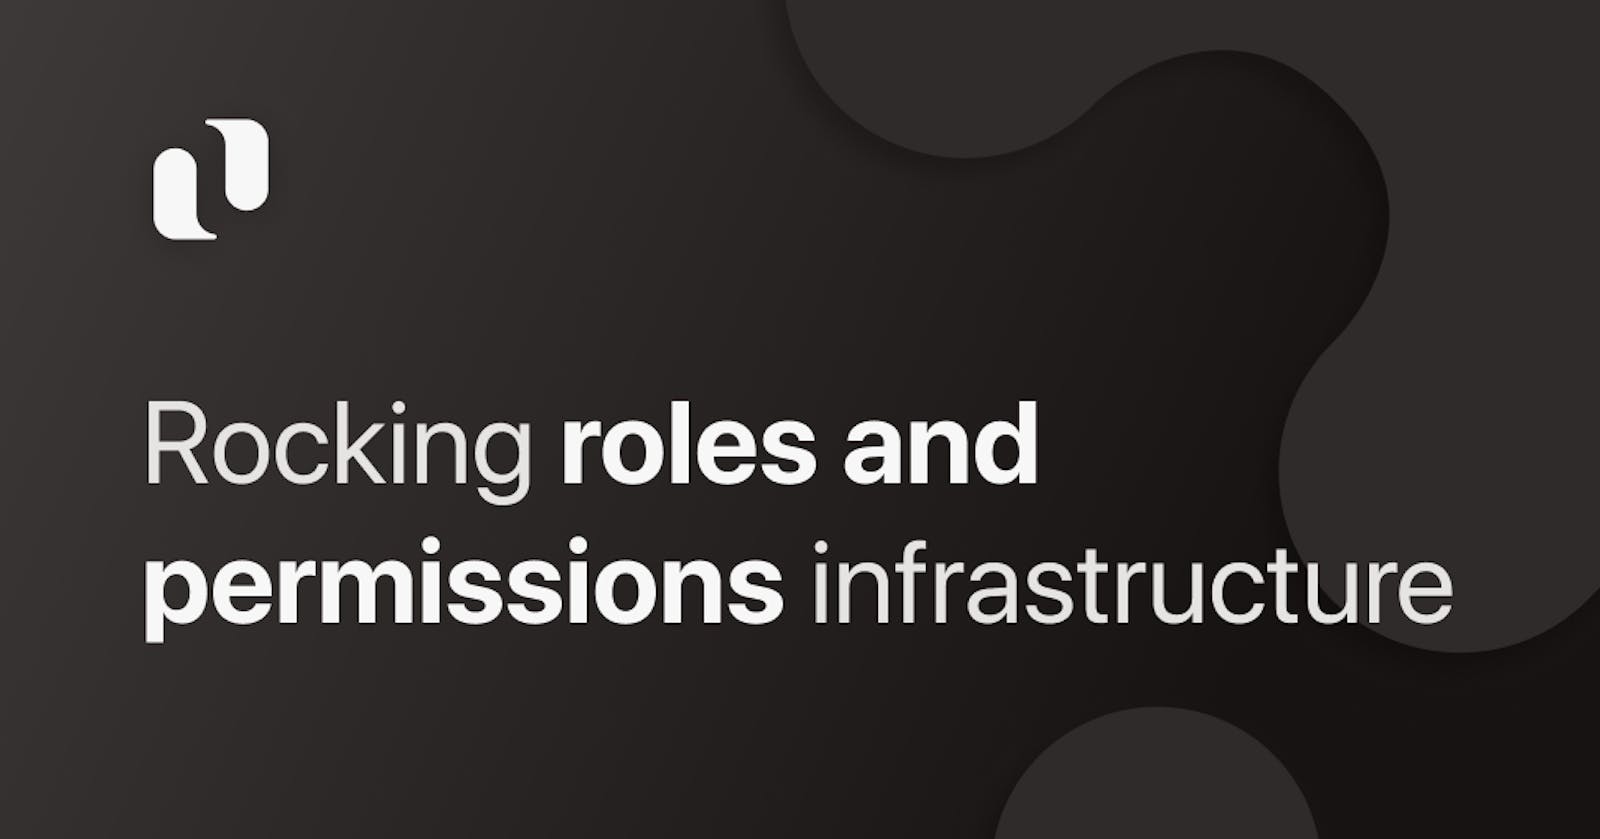 Rocking roles and permissions infrastructure